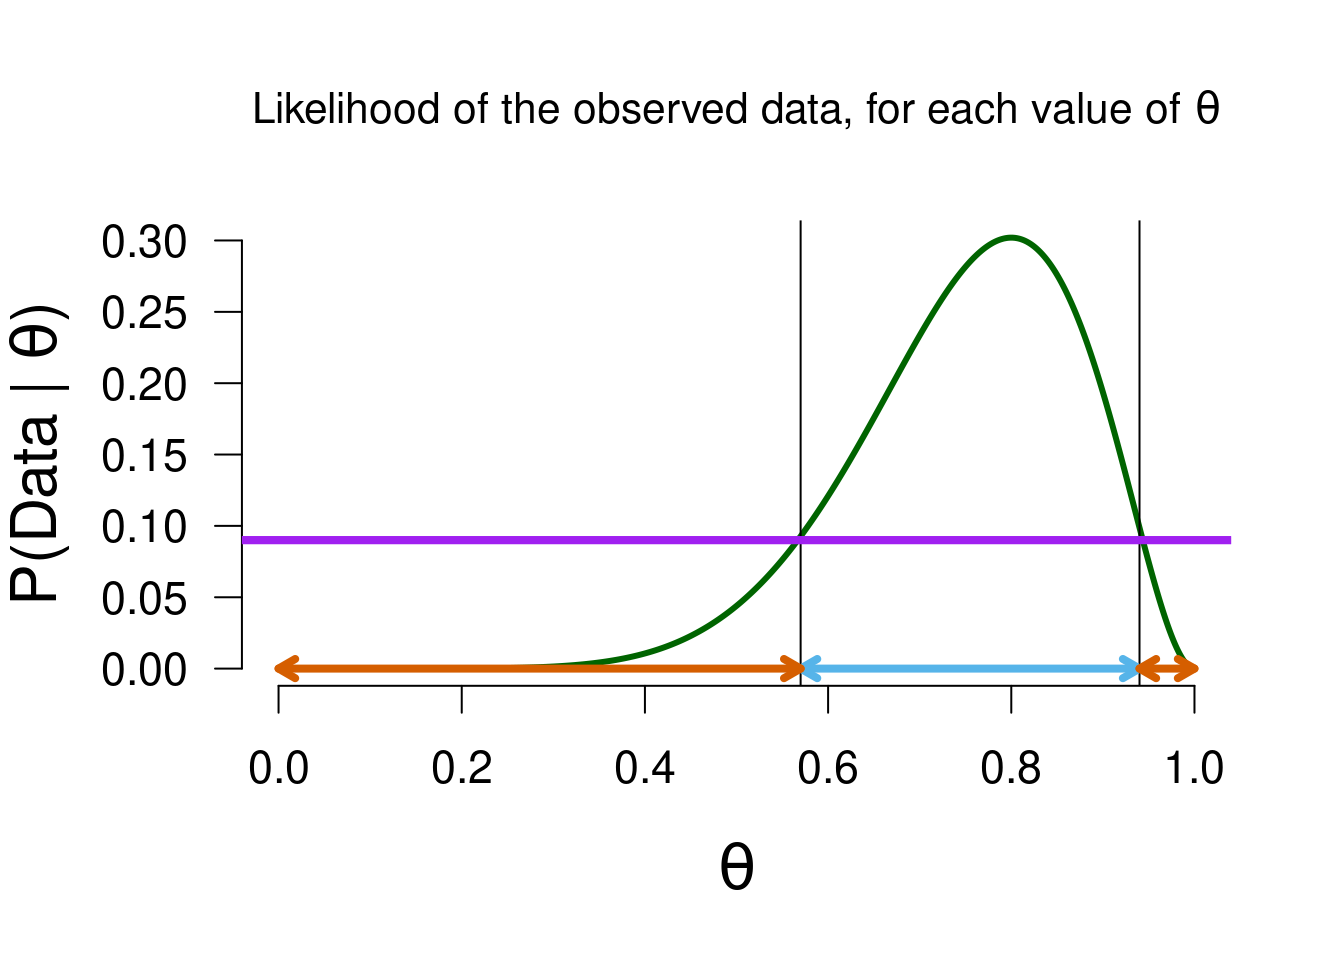 Values of theta that predicted the data better than average (marked in blue) will have a updating factor greater than 1, and receive a boost in plausibility as a result of the data. The reverse holds for values that predicted worse than average (marked in vermillion). 